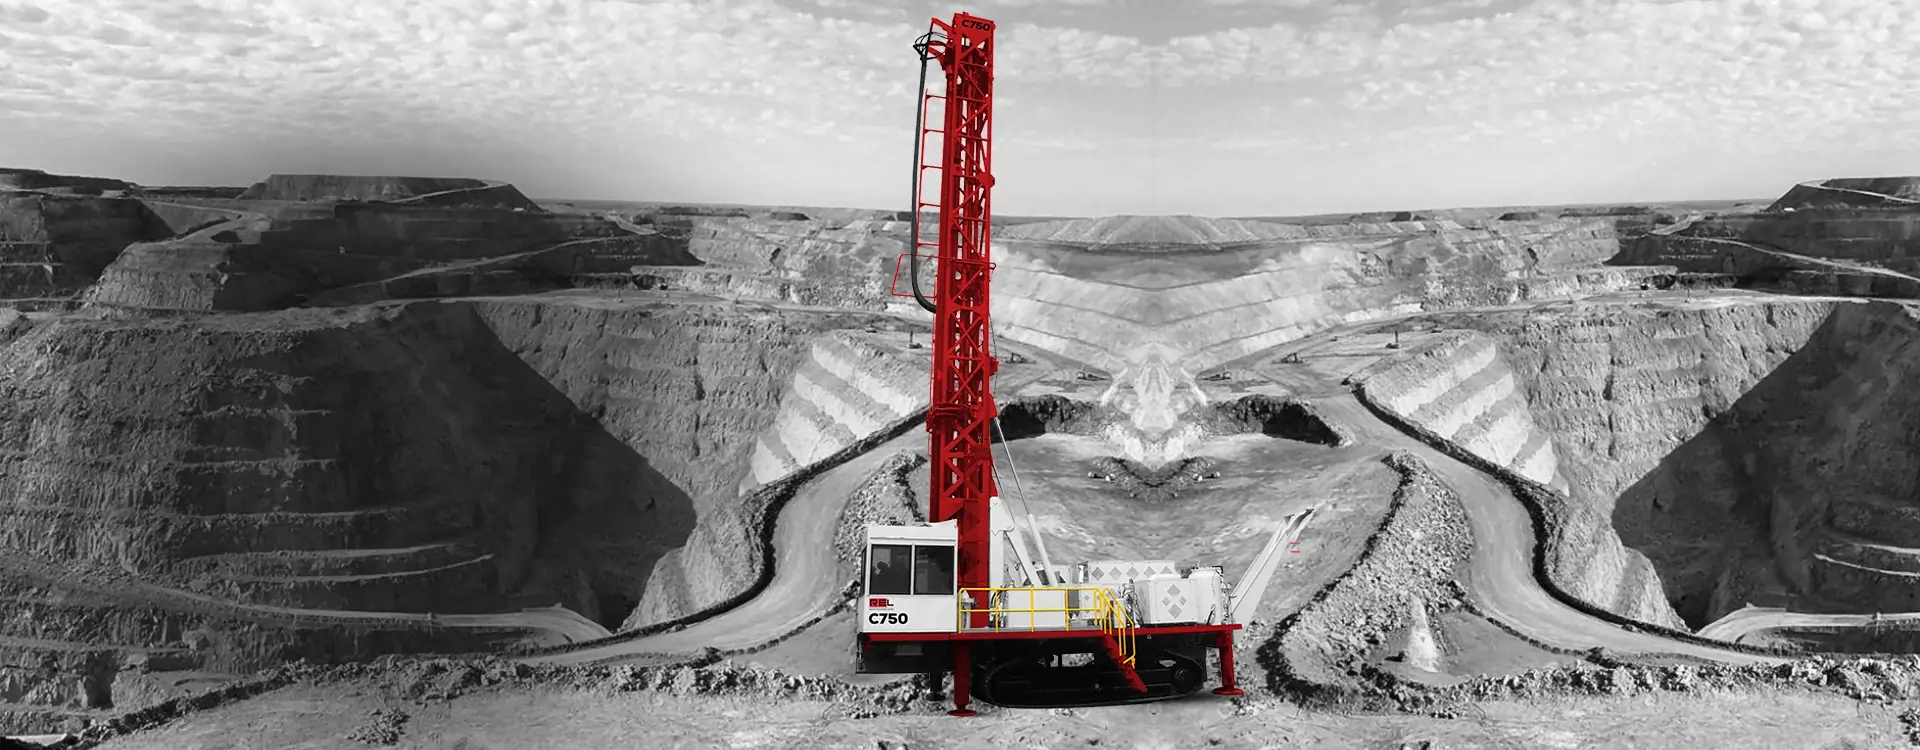 Introduction of Latest Drill Rig Innovation